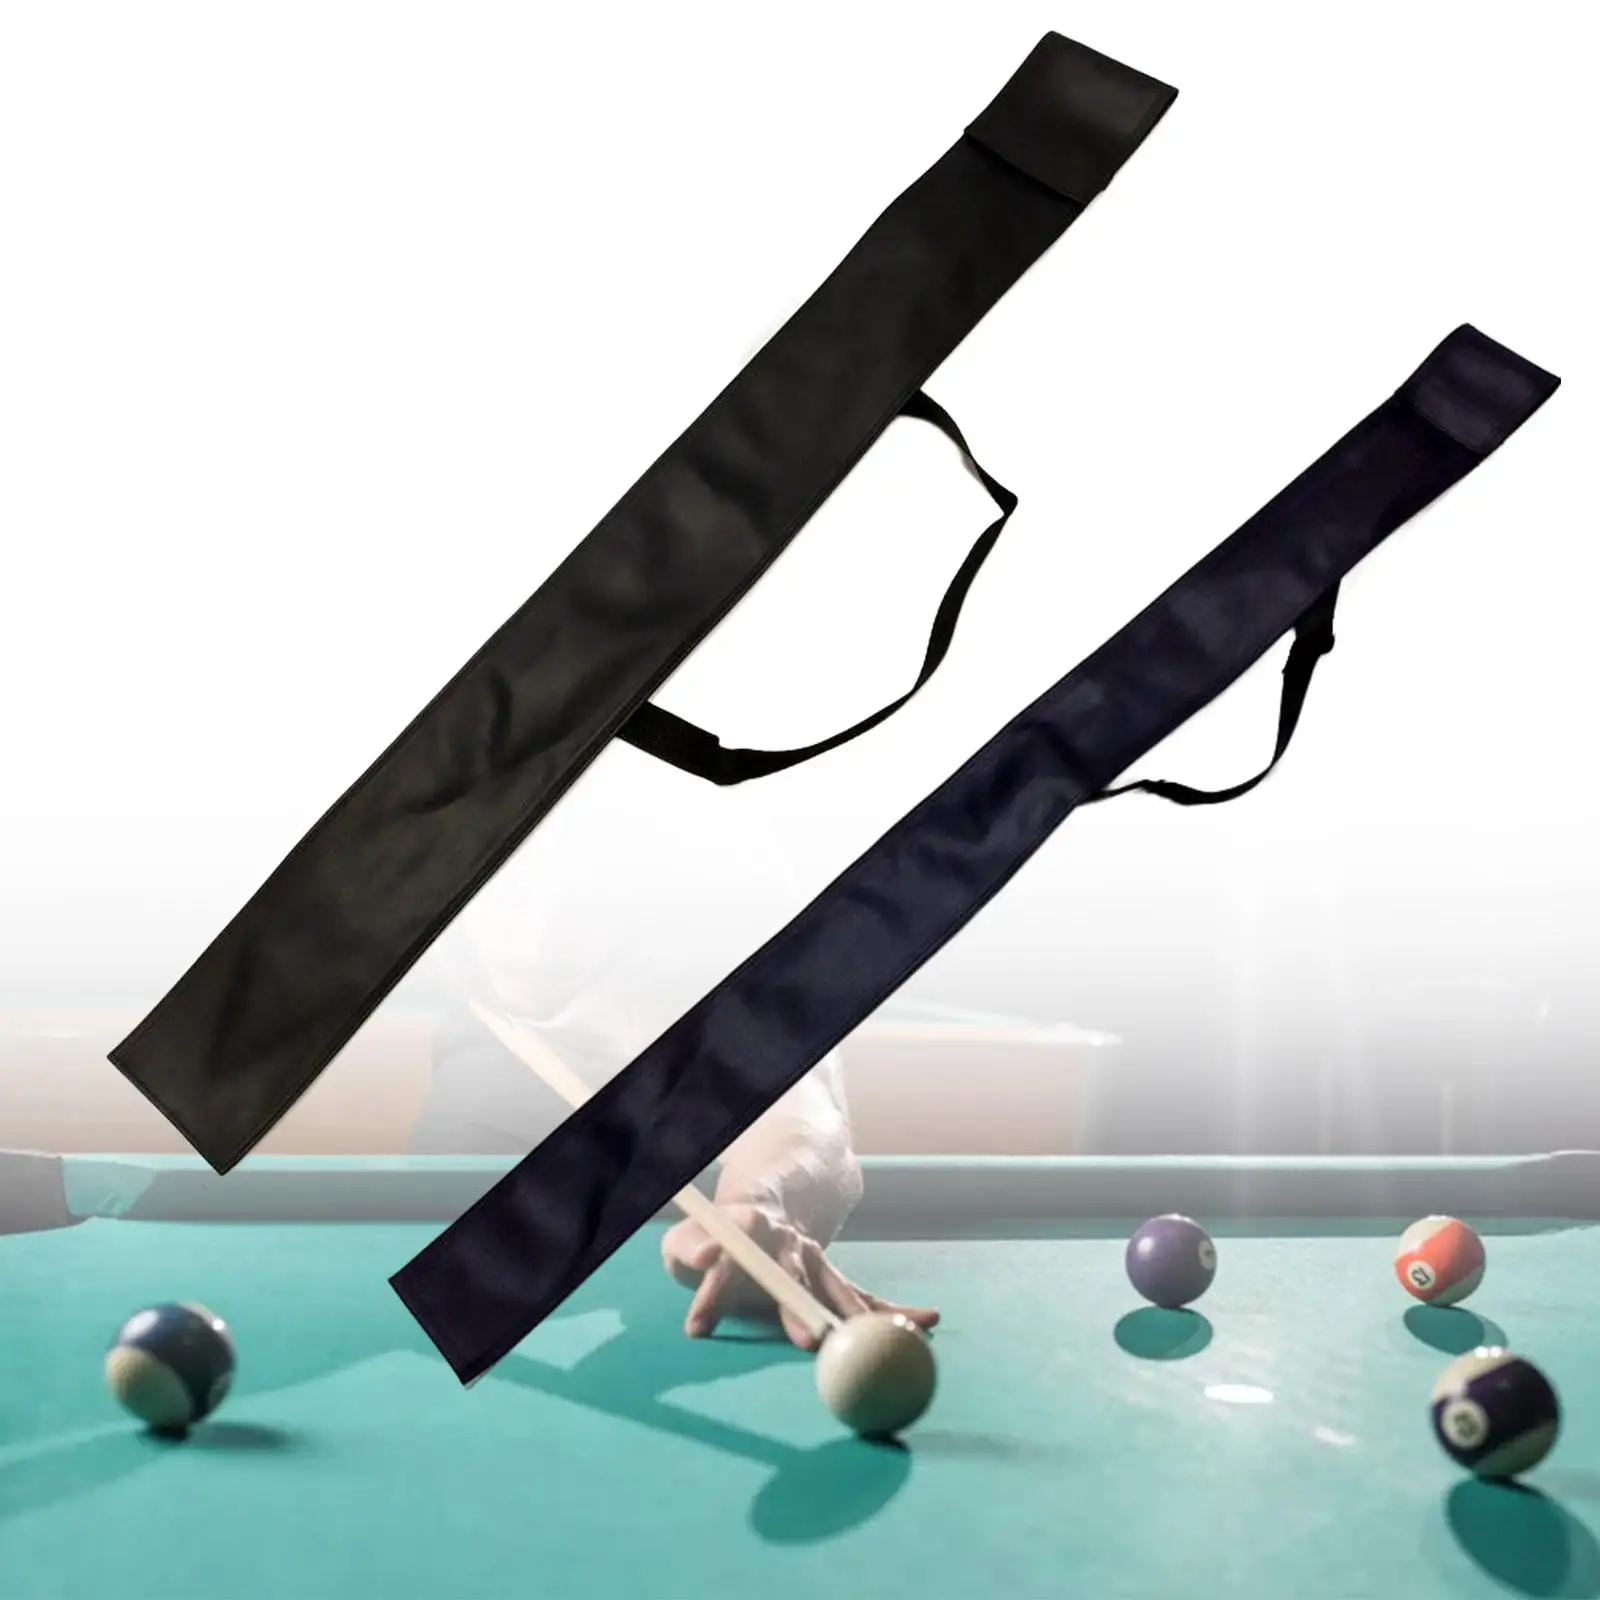 Billiard Pool Cue Rod Carrying Case with Shoulder Strap Holder Pool Cue Pouch for Billiard Stick Rod Travel Snooker Club Outdoor